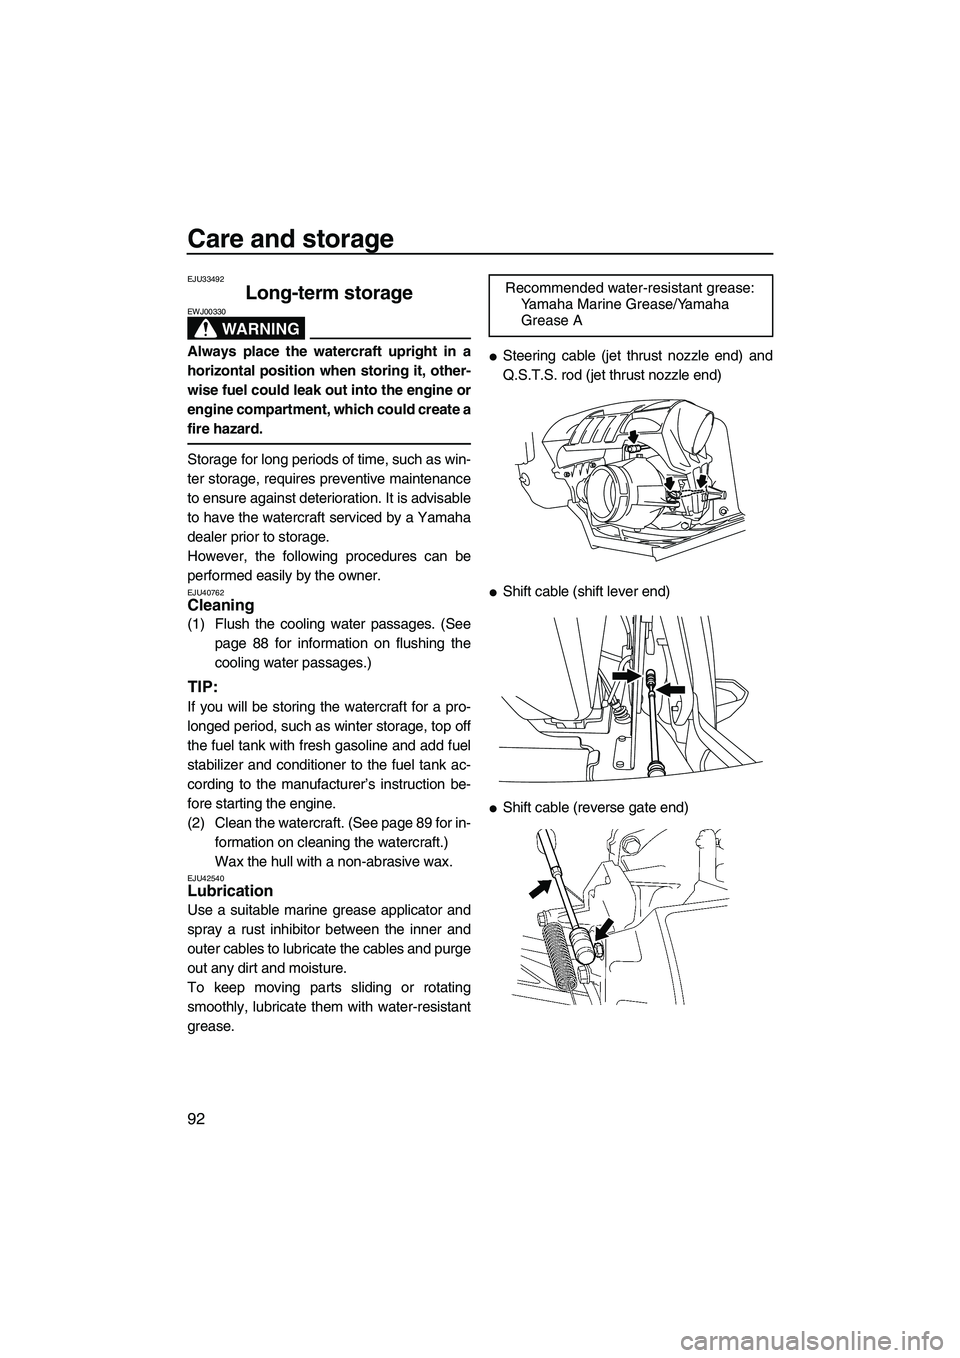 YAMAHA FX HO 2013  Owners Manual Care and storage
92
EJU33492
Long-term storage 
WARNING
EWJ00330
Always place the watercraft upright in a
horizontal position when storing it, other-
wise fuel could leak out into the engine or
engine